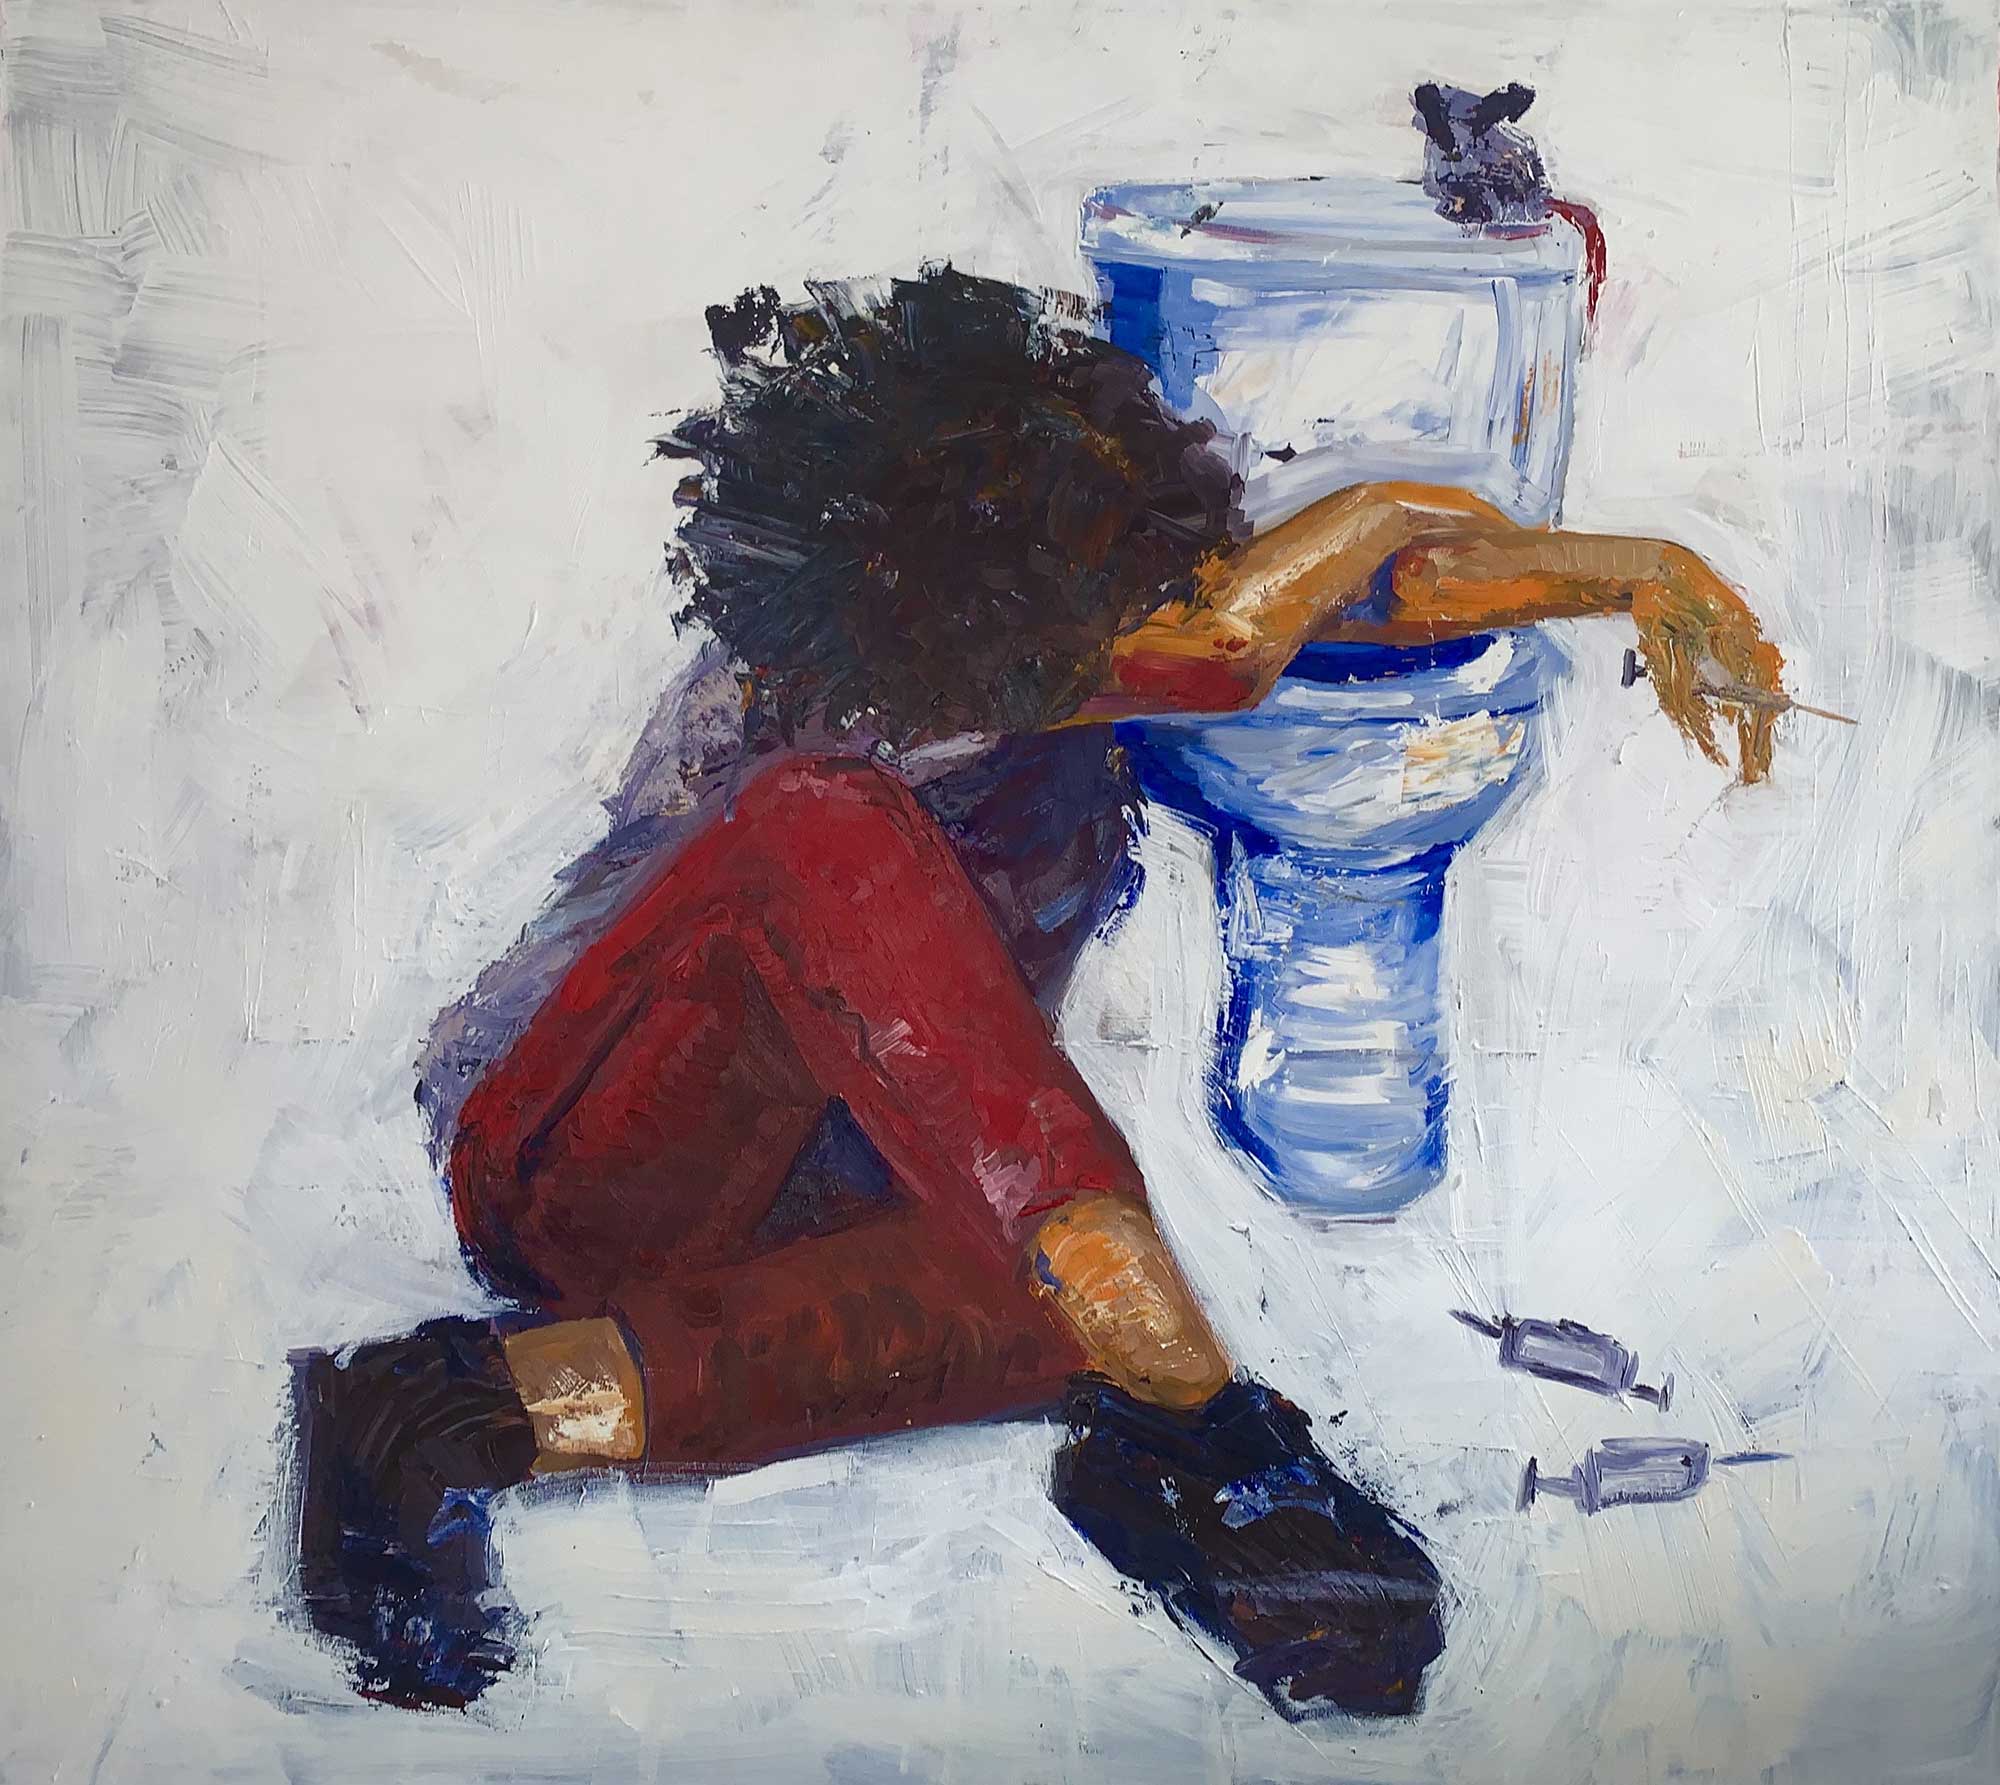 A painting of a person sitting next to a toilet